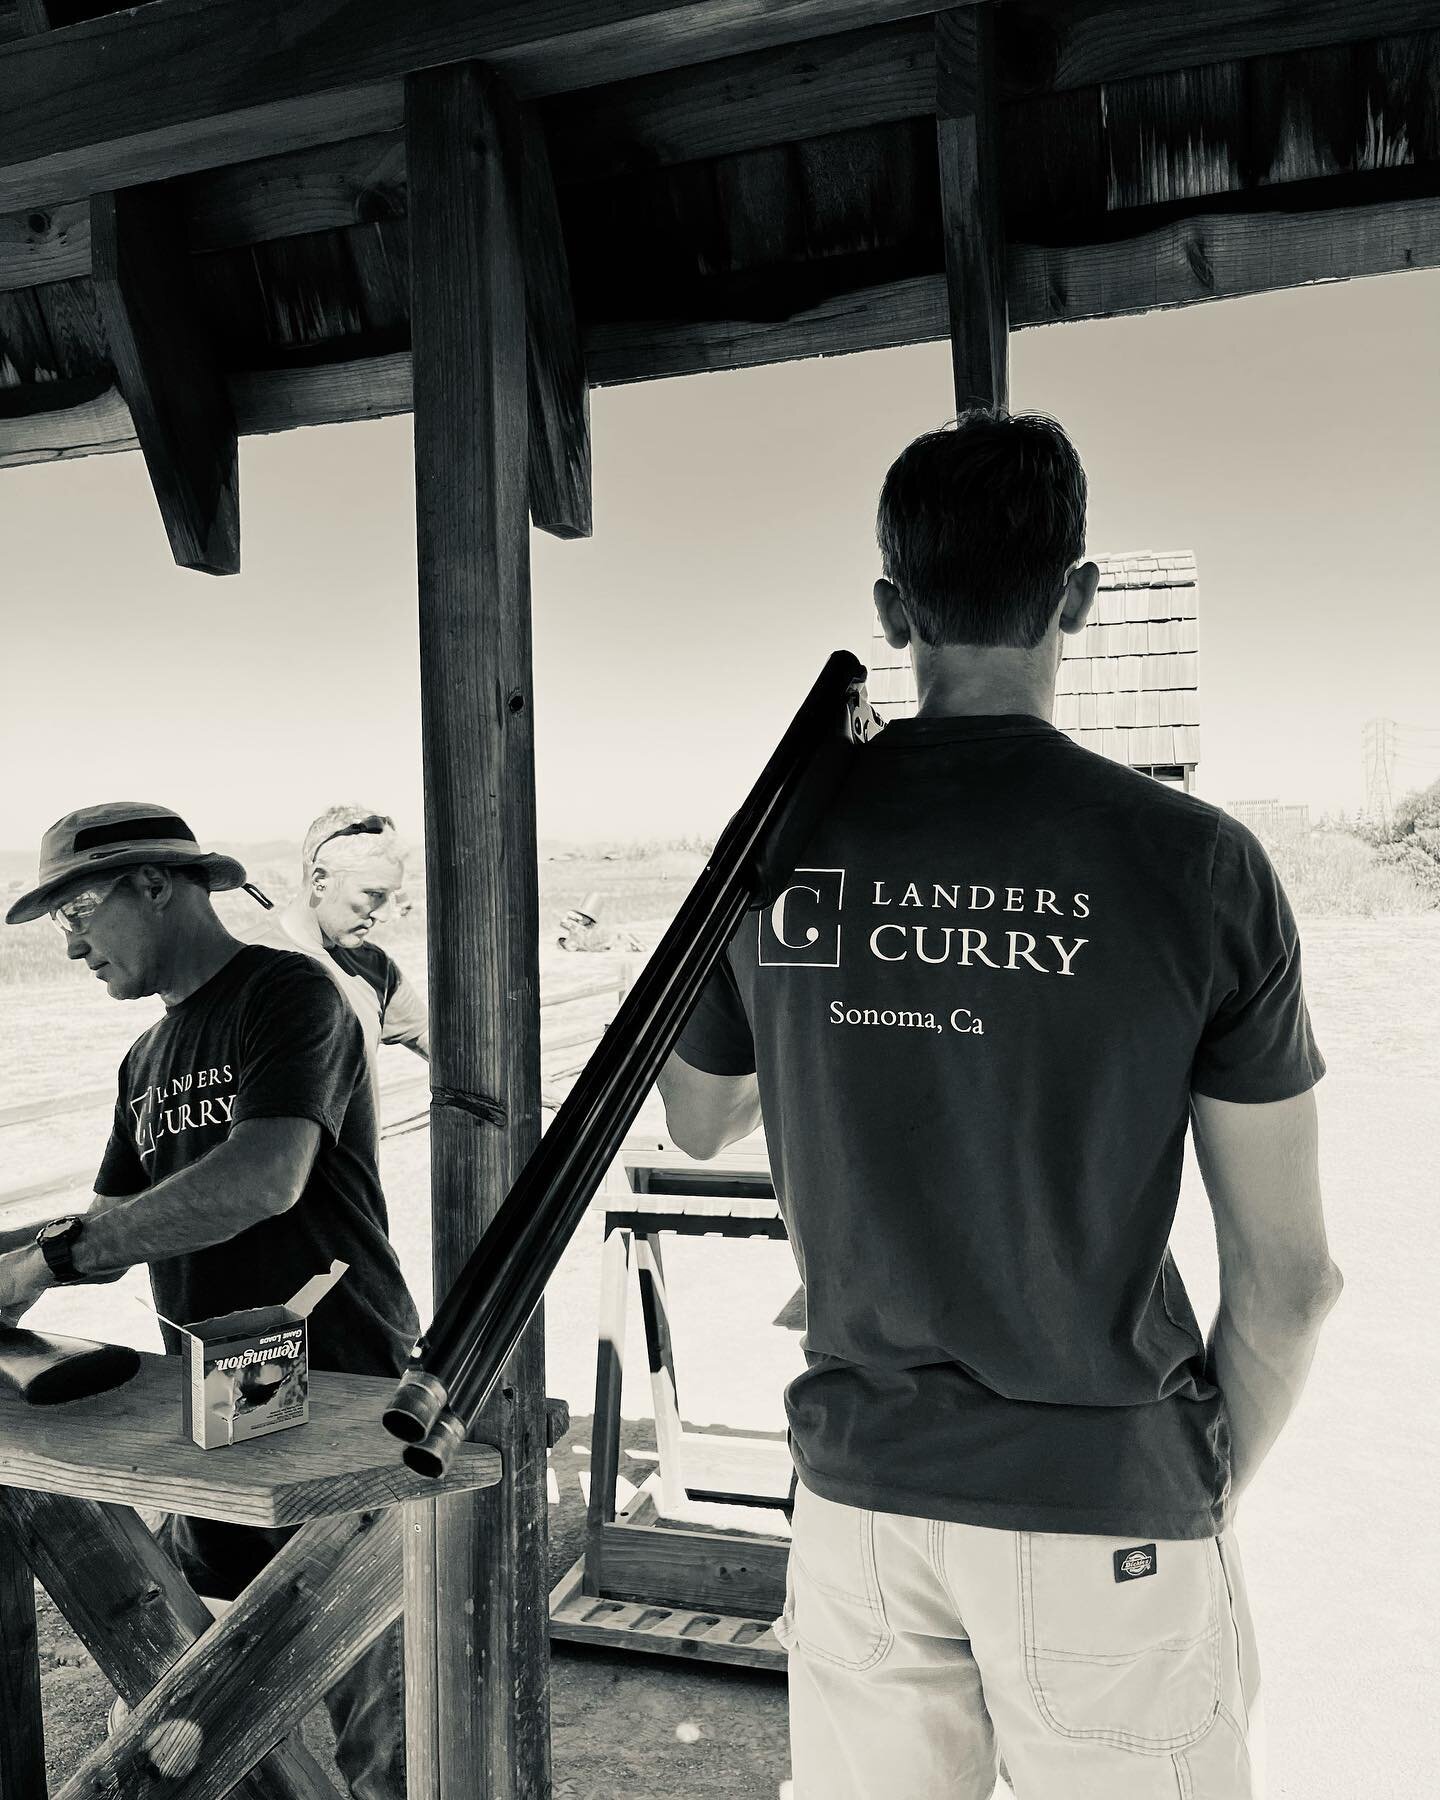 Landers Curry, company birthday retreat at Wing And Barrel&hellip; Good times Landers Curry, crew. Thank you for all your hard work